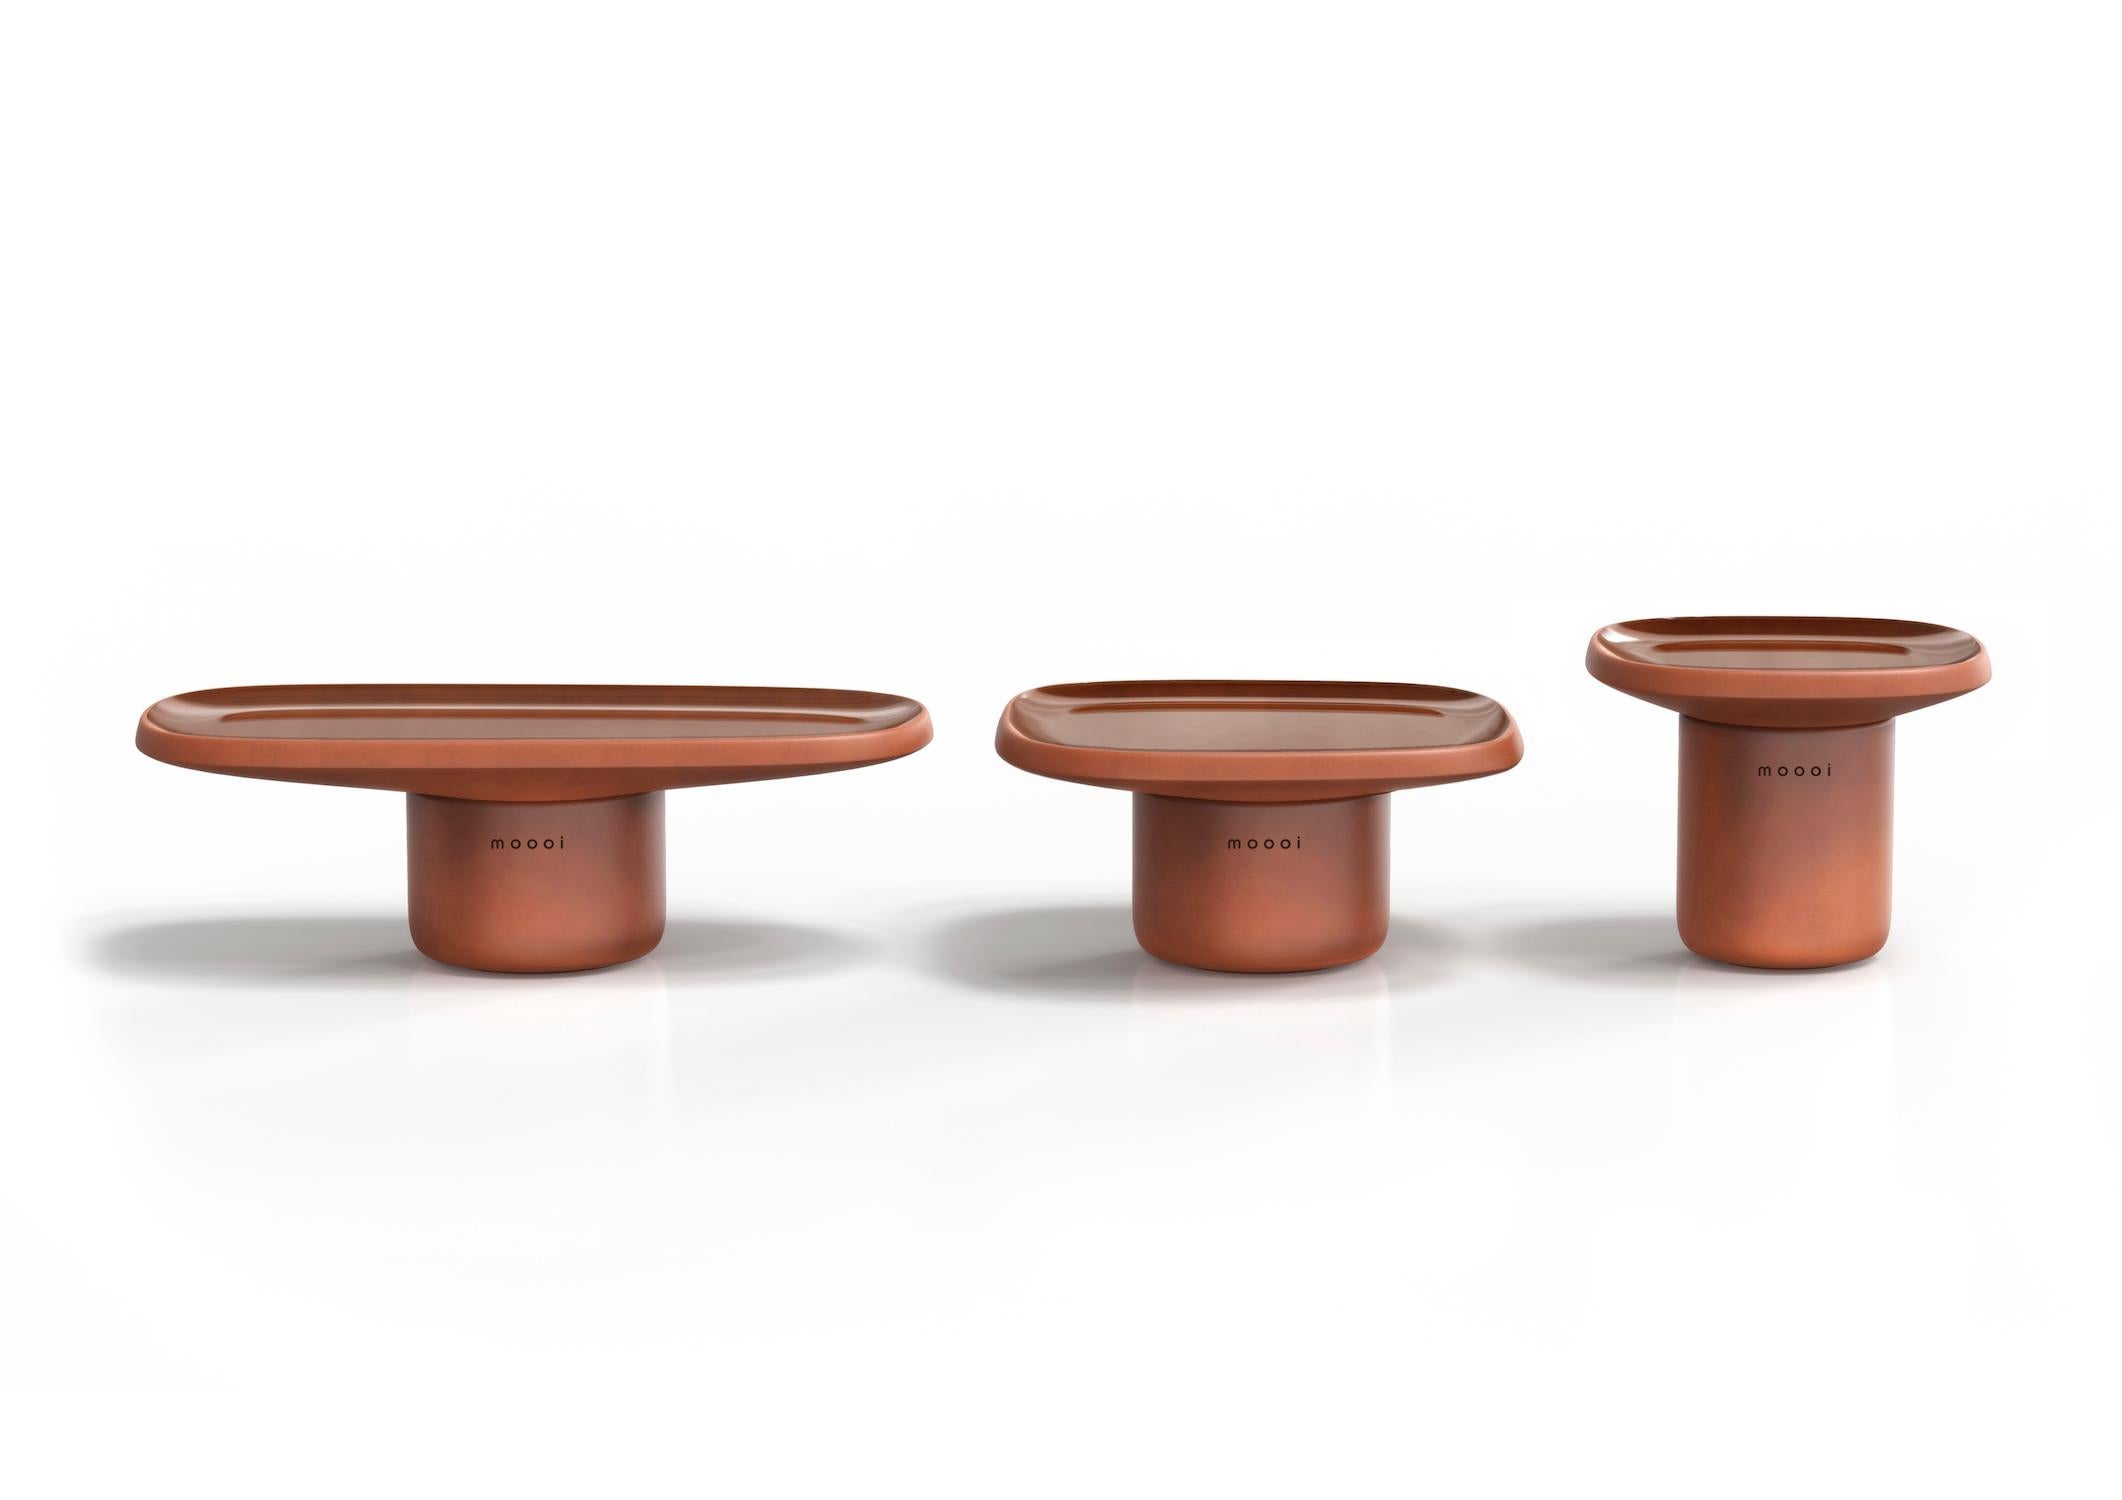 Dutch Obon Square High Table in Terracotta Ceramic with Glazed Top by Simone Bonanni For Sale